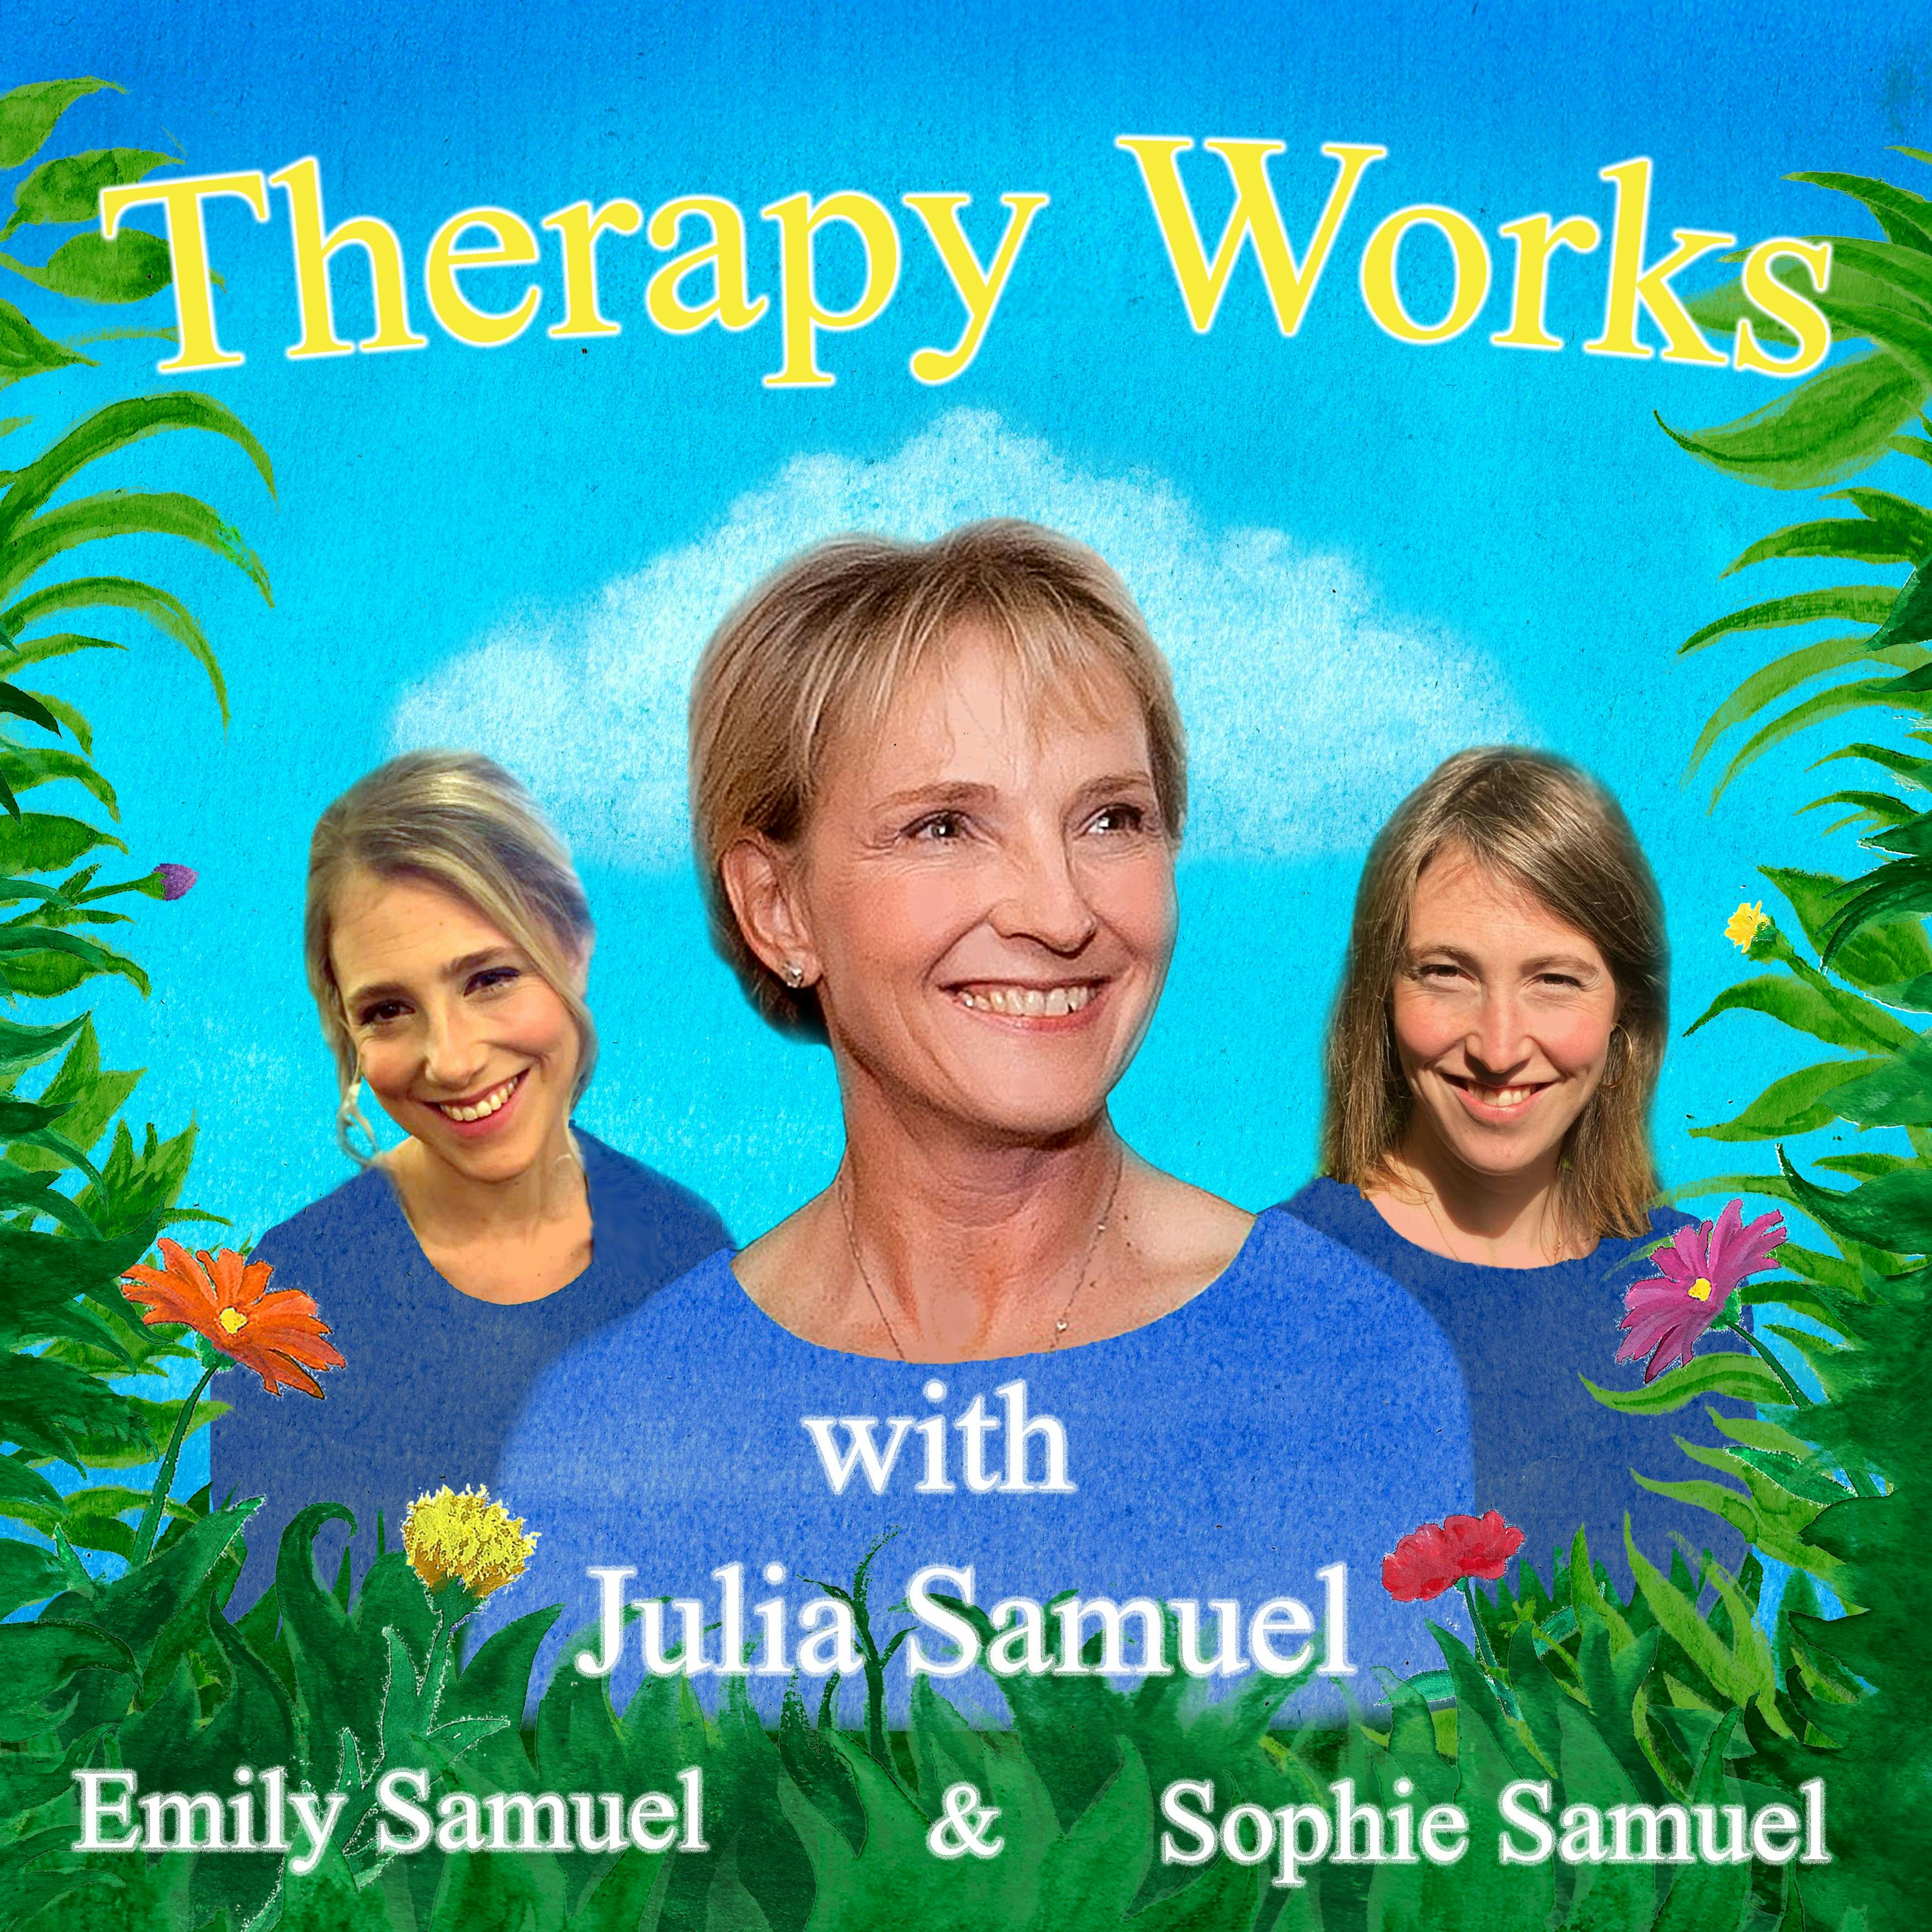 Julia Samuel sits in the therapy chair and shares the challenges she has faced